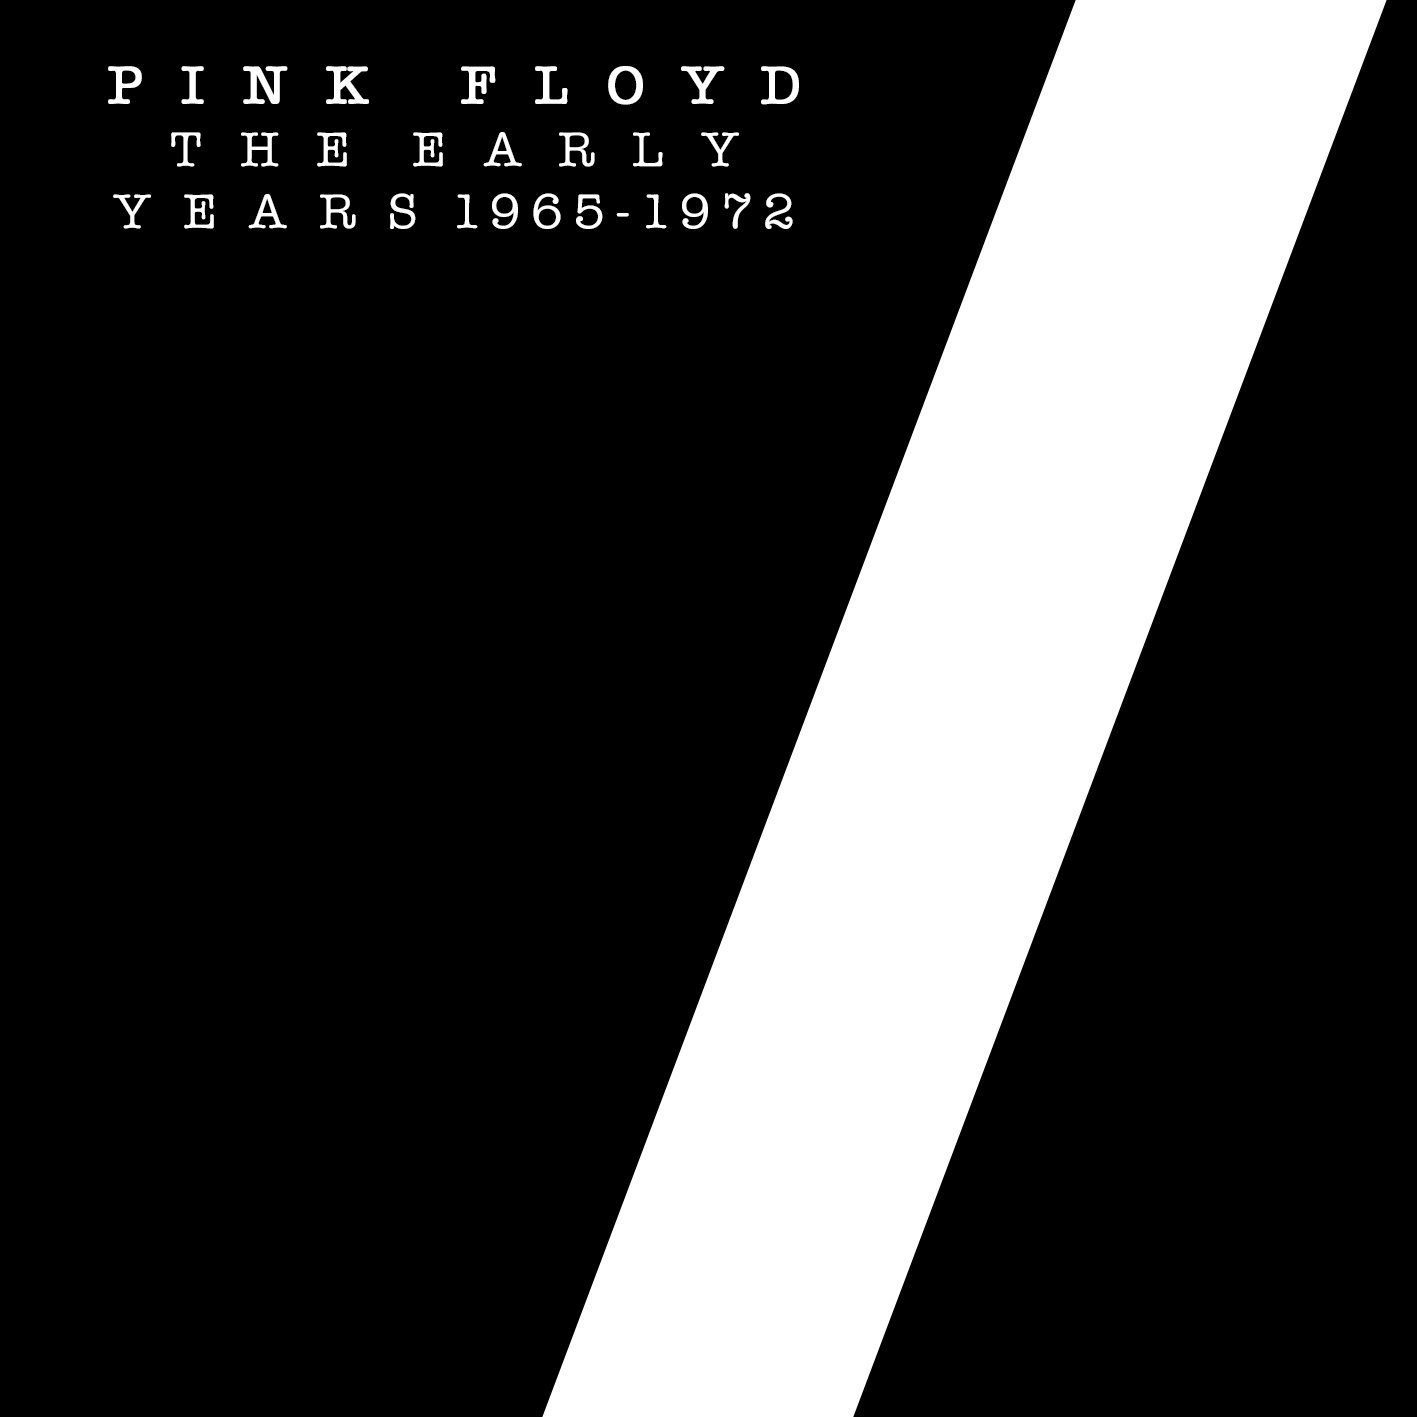 Pink Floyd - The Early Years 1965-1972 (2016/2017) [HDTracks FLAC 24bit/44,1kHz]